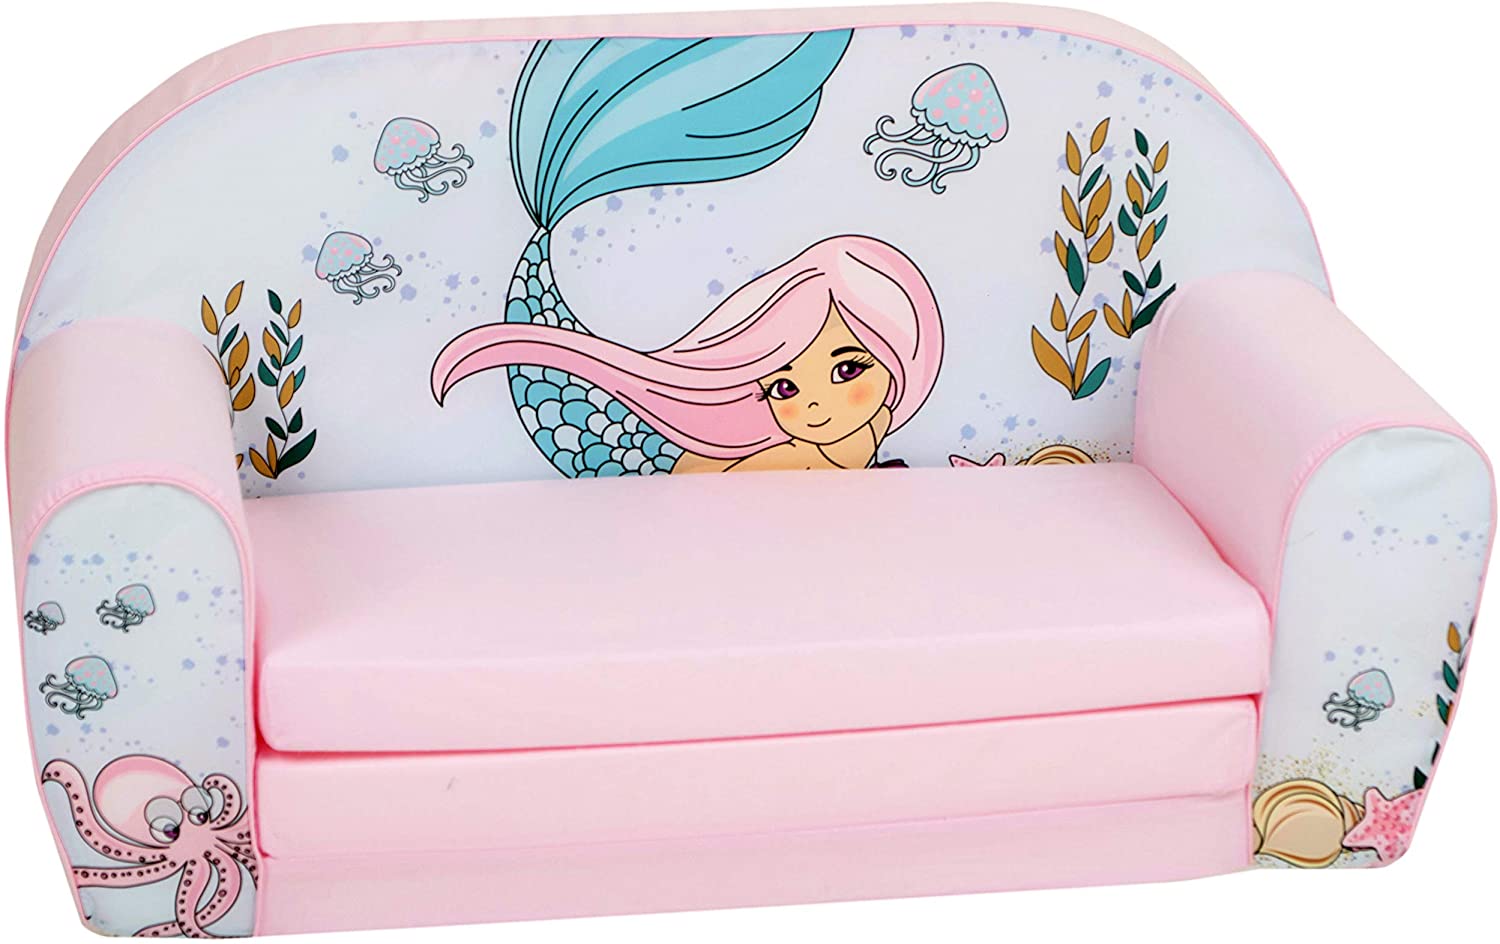 childrens foam fold out couch